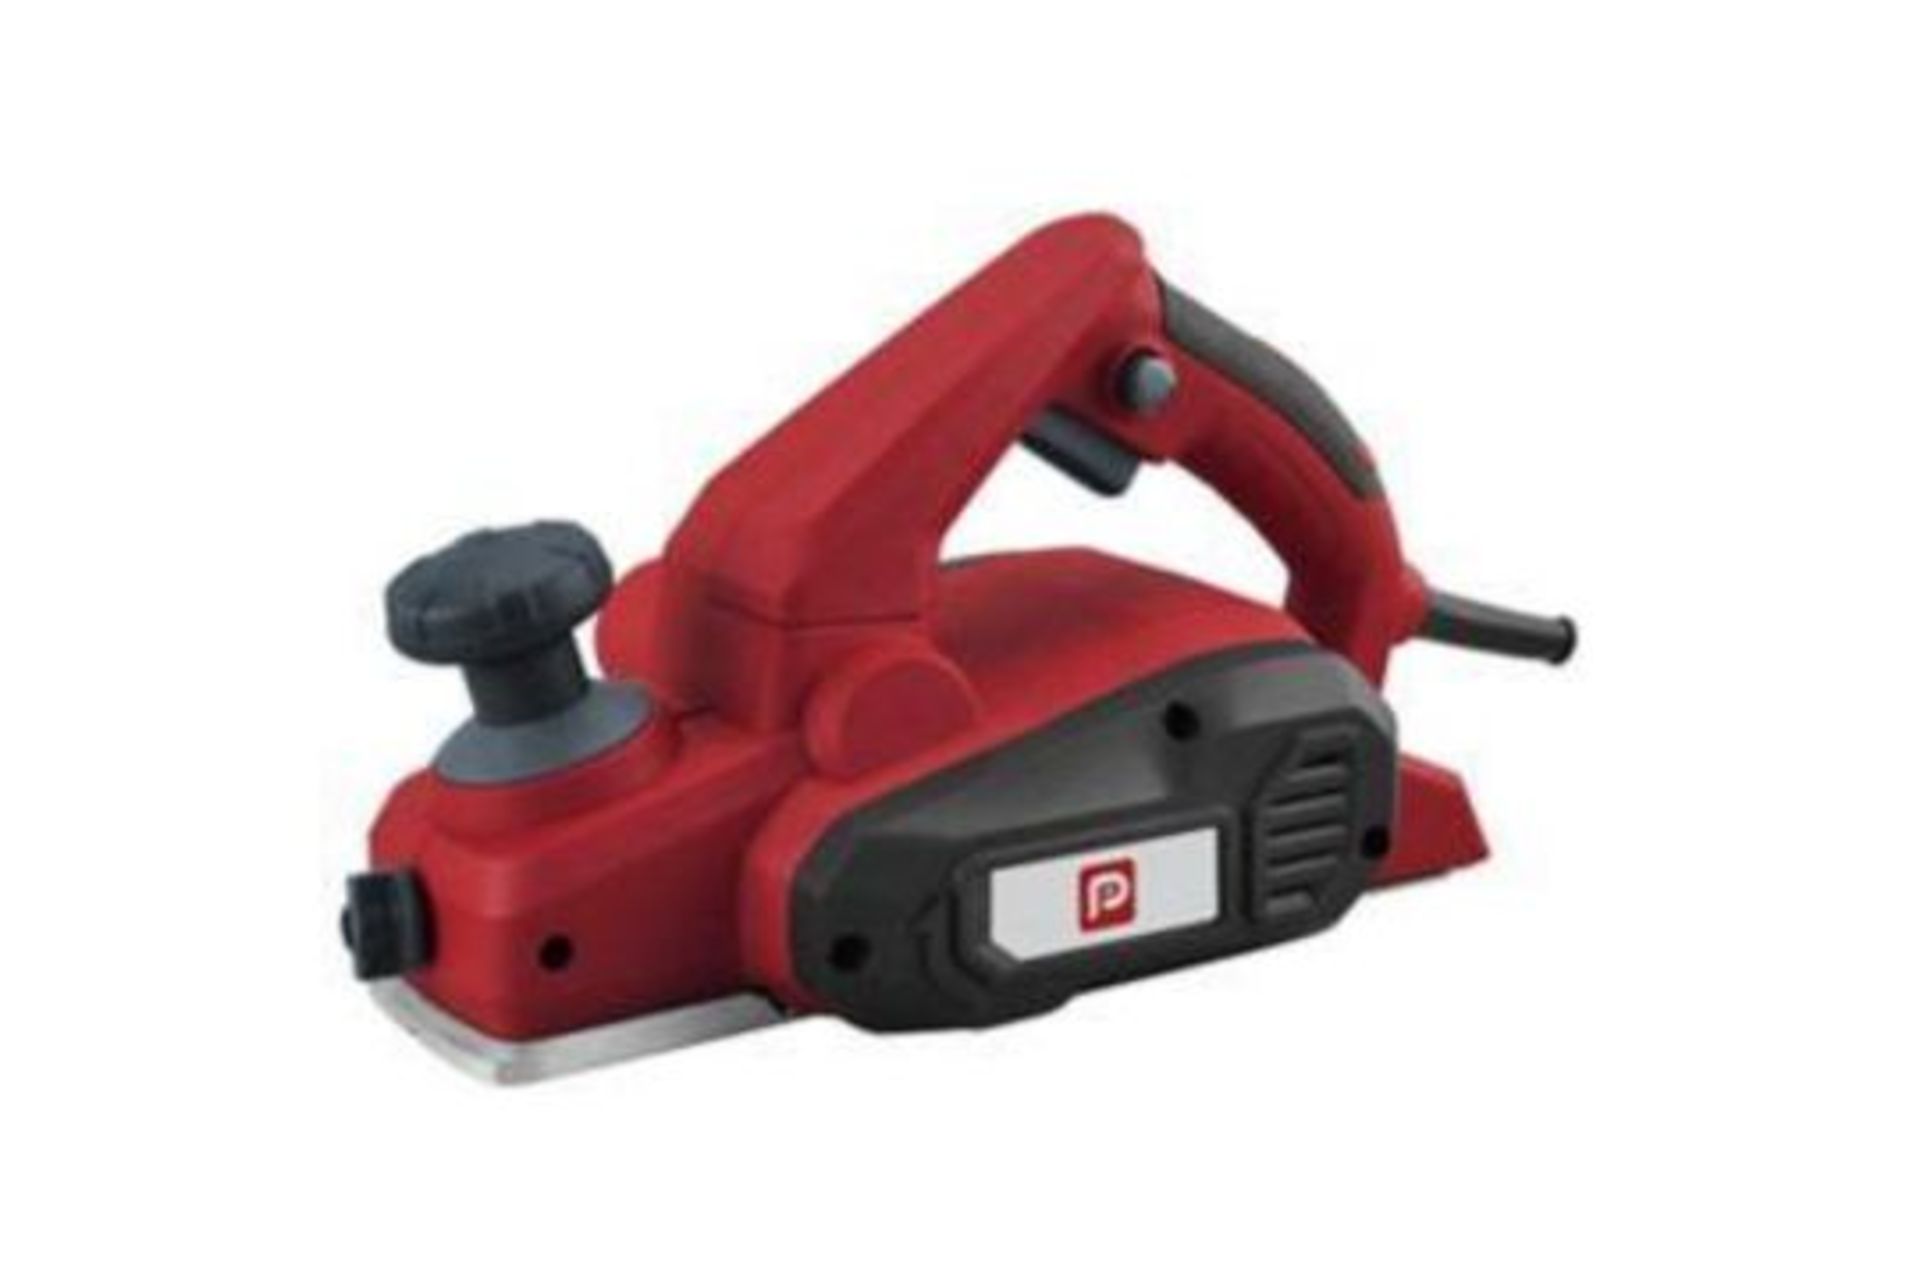 Performance Power 650W 220-240V 2mm Corded Planer Php650C - R13A.3 This corded planer can be used